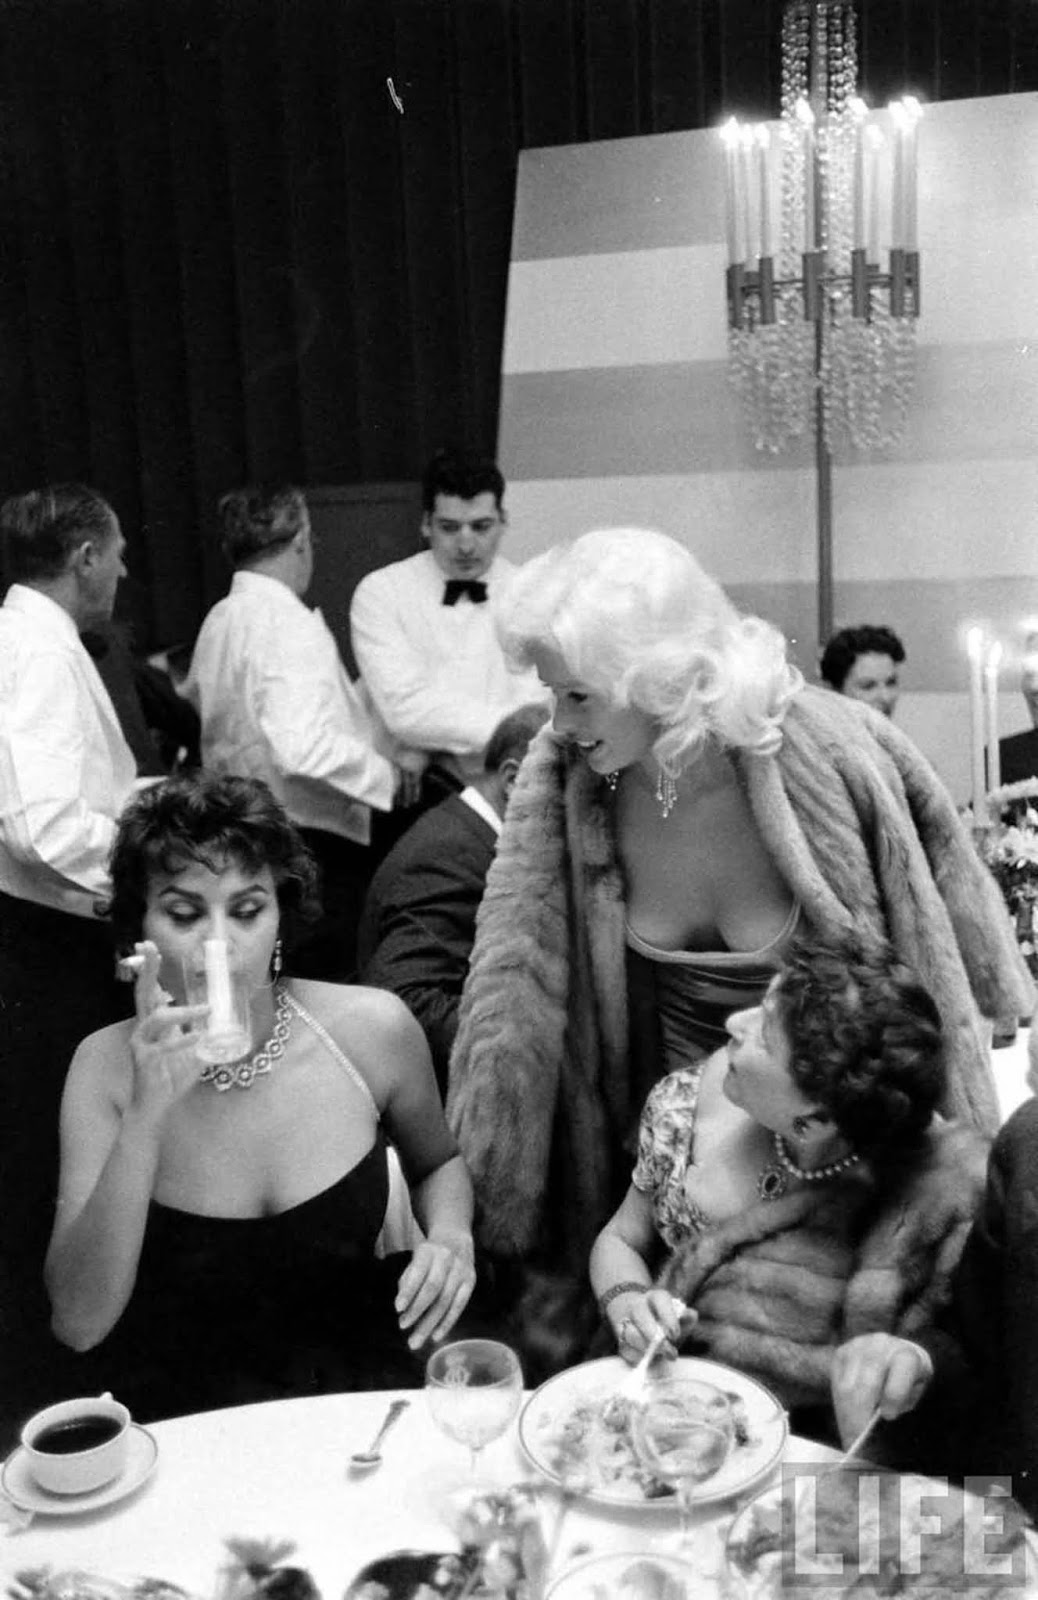 The story behind the infamous Sophia Loren and Jayne Mansfield photo, 1957